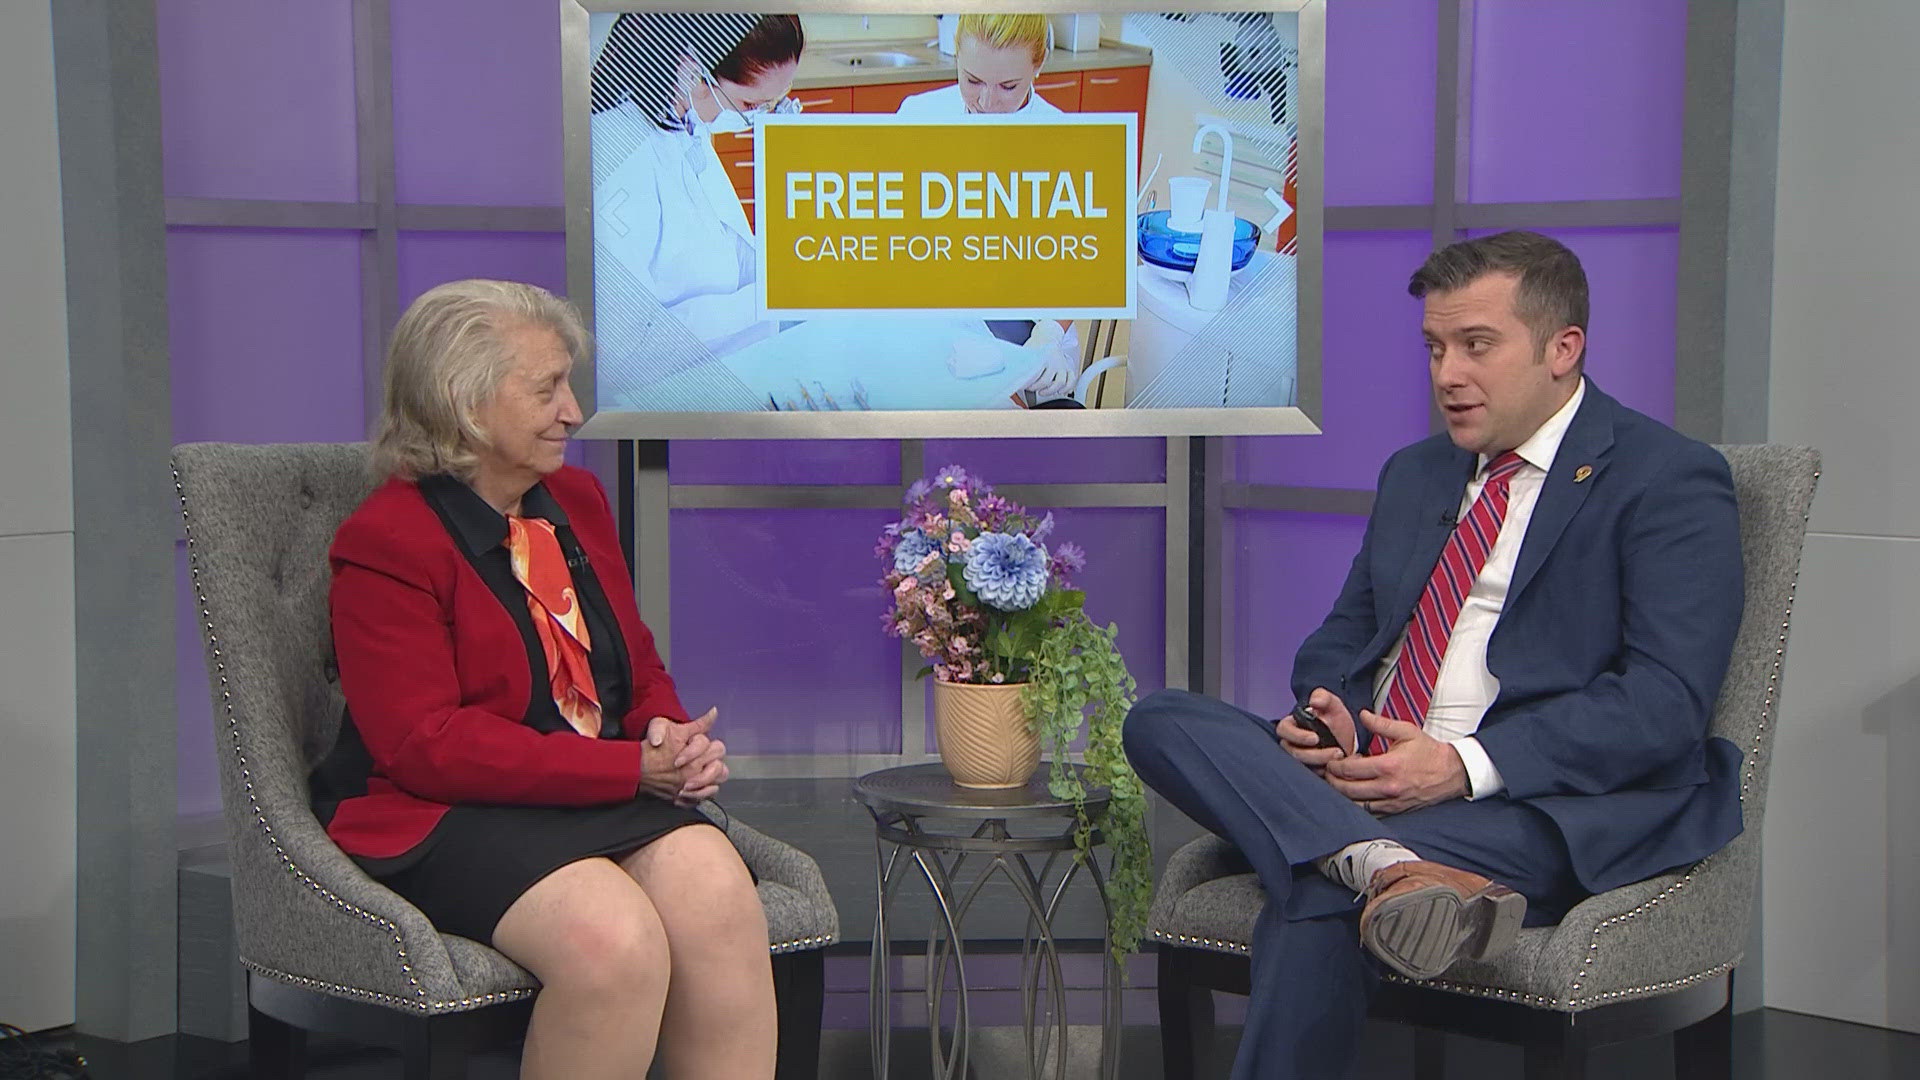 The Colorado Gerontological Society has a grant program that can help low-income Colorado seniors pay for dental care.